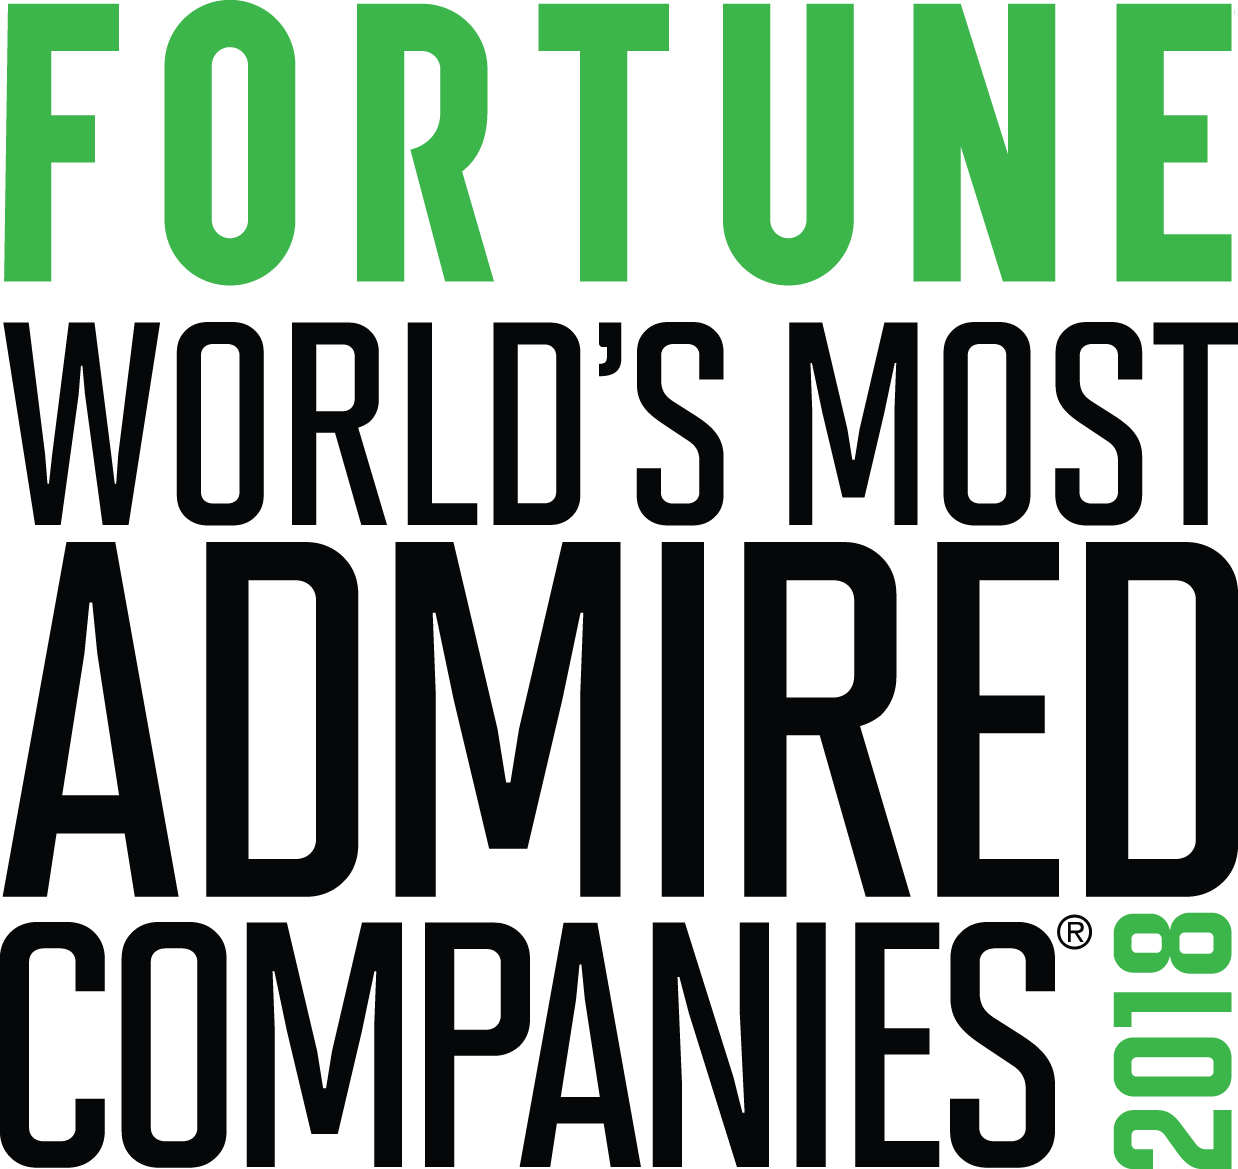 FORTUNE World's Most Admired Companies 2018